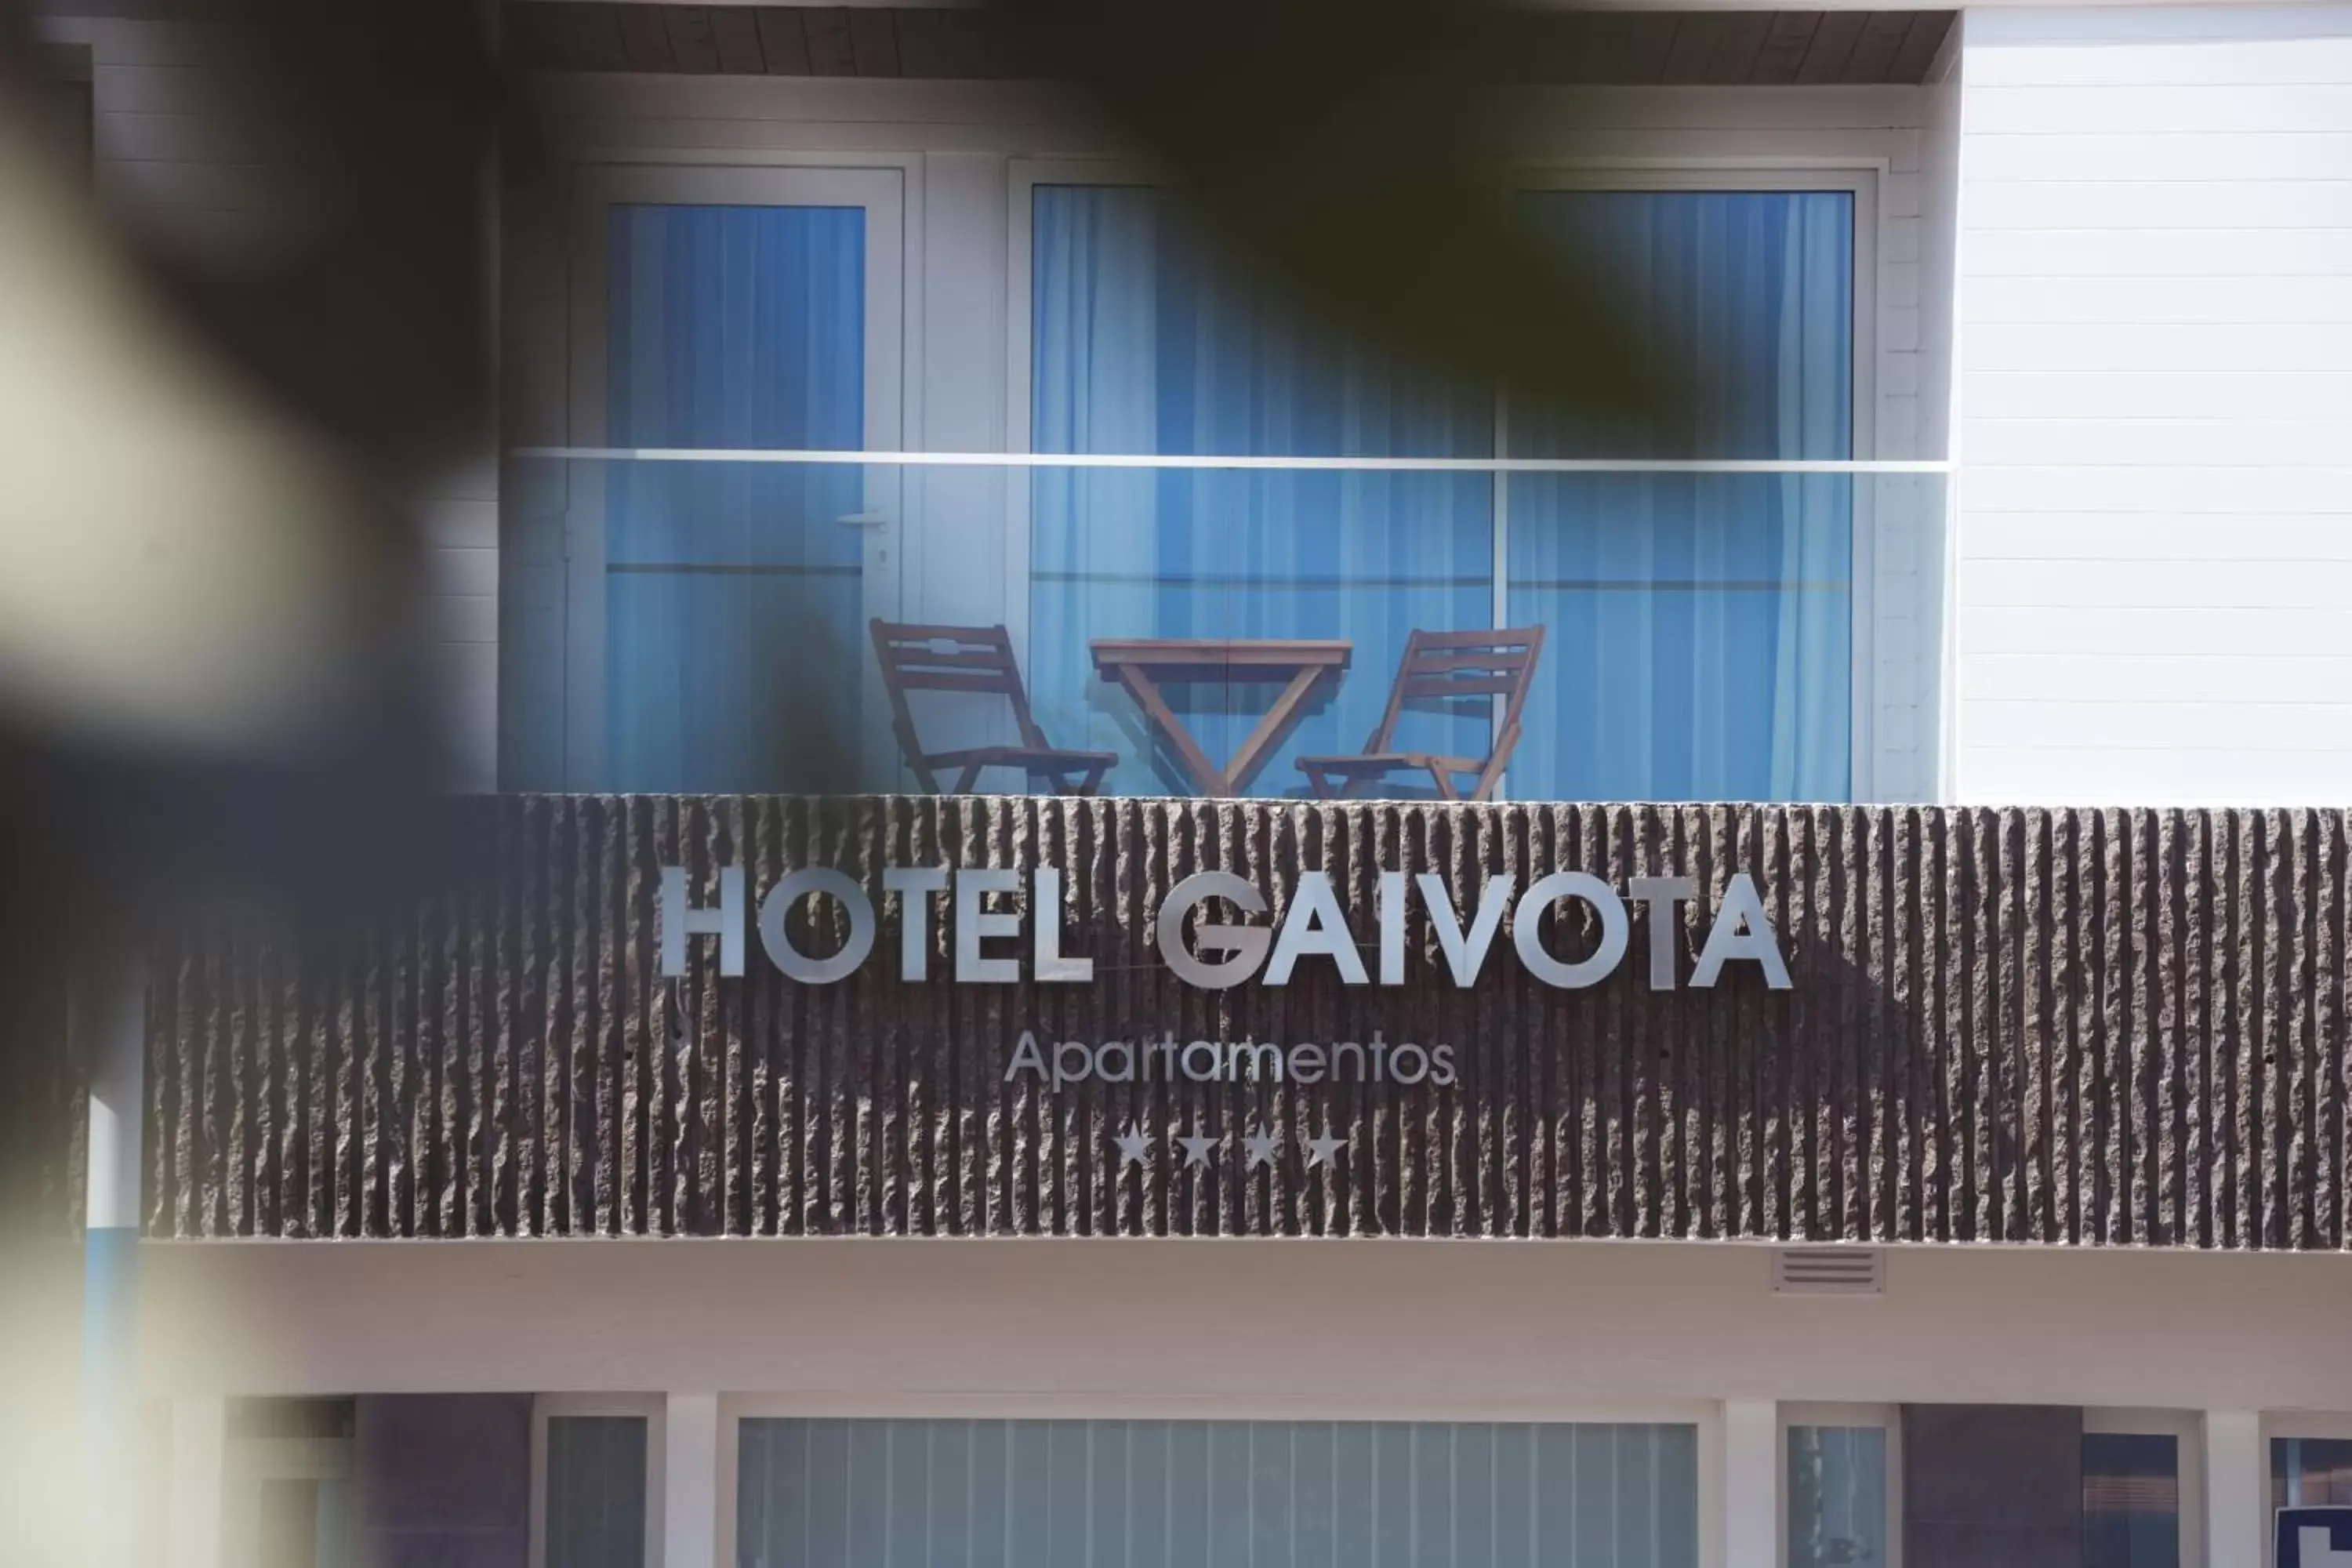 Property building in Hotel Gaivota Azores